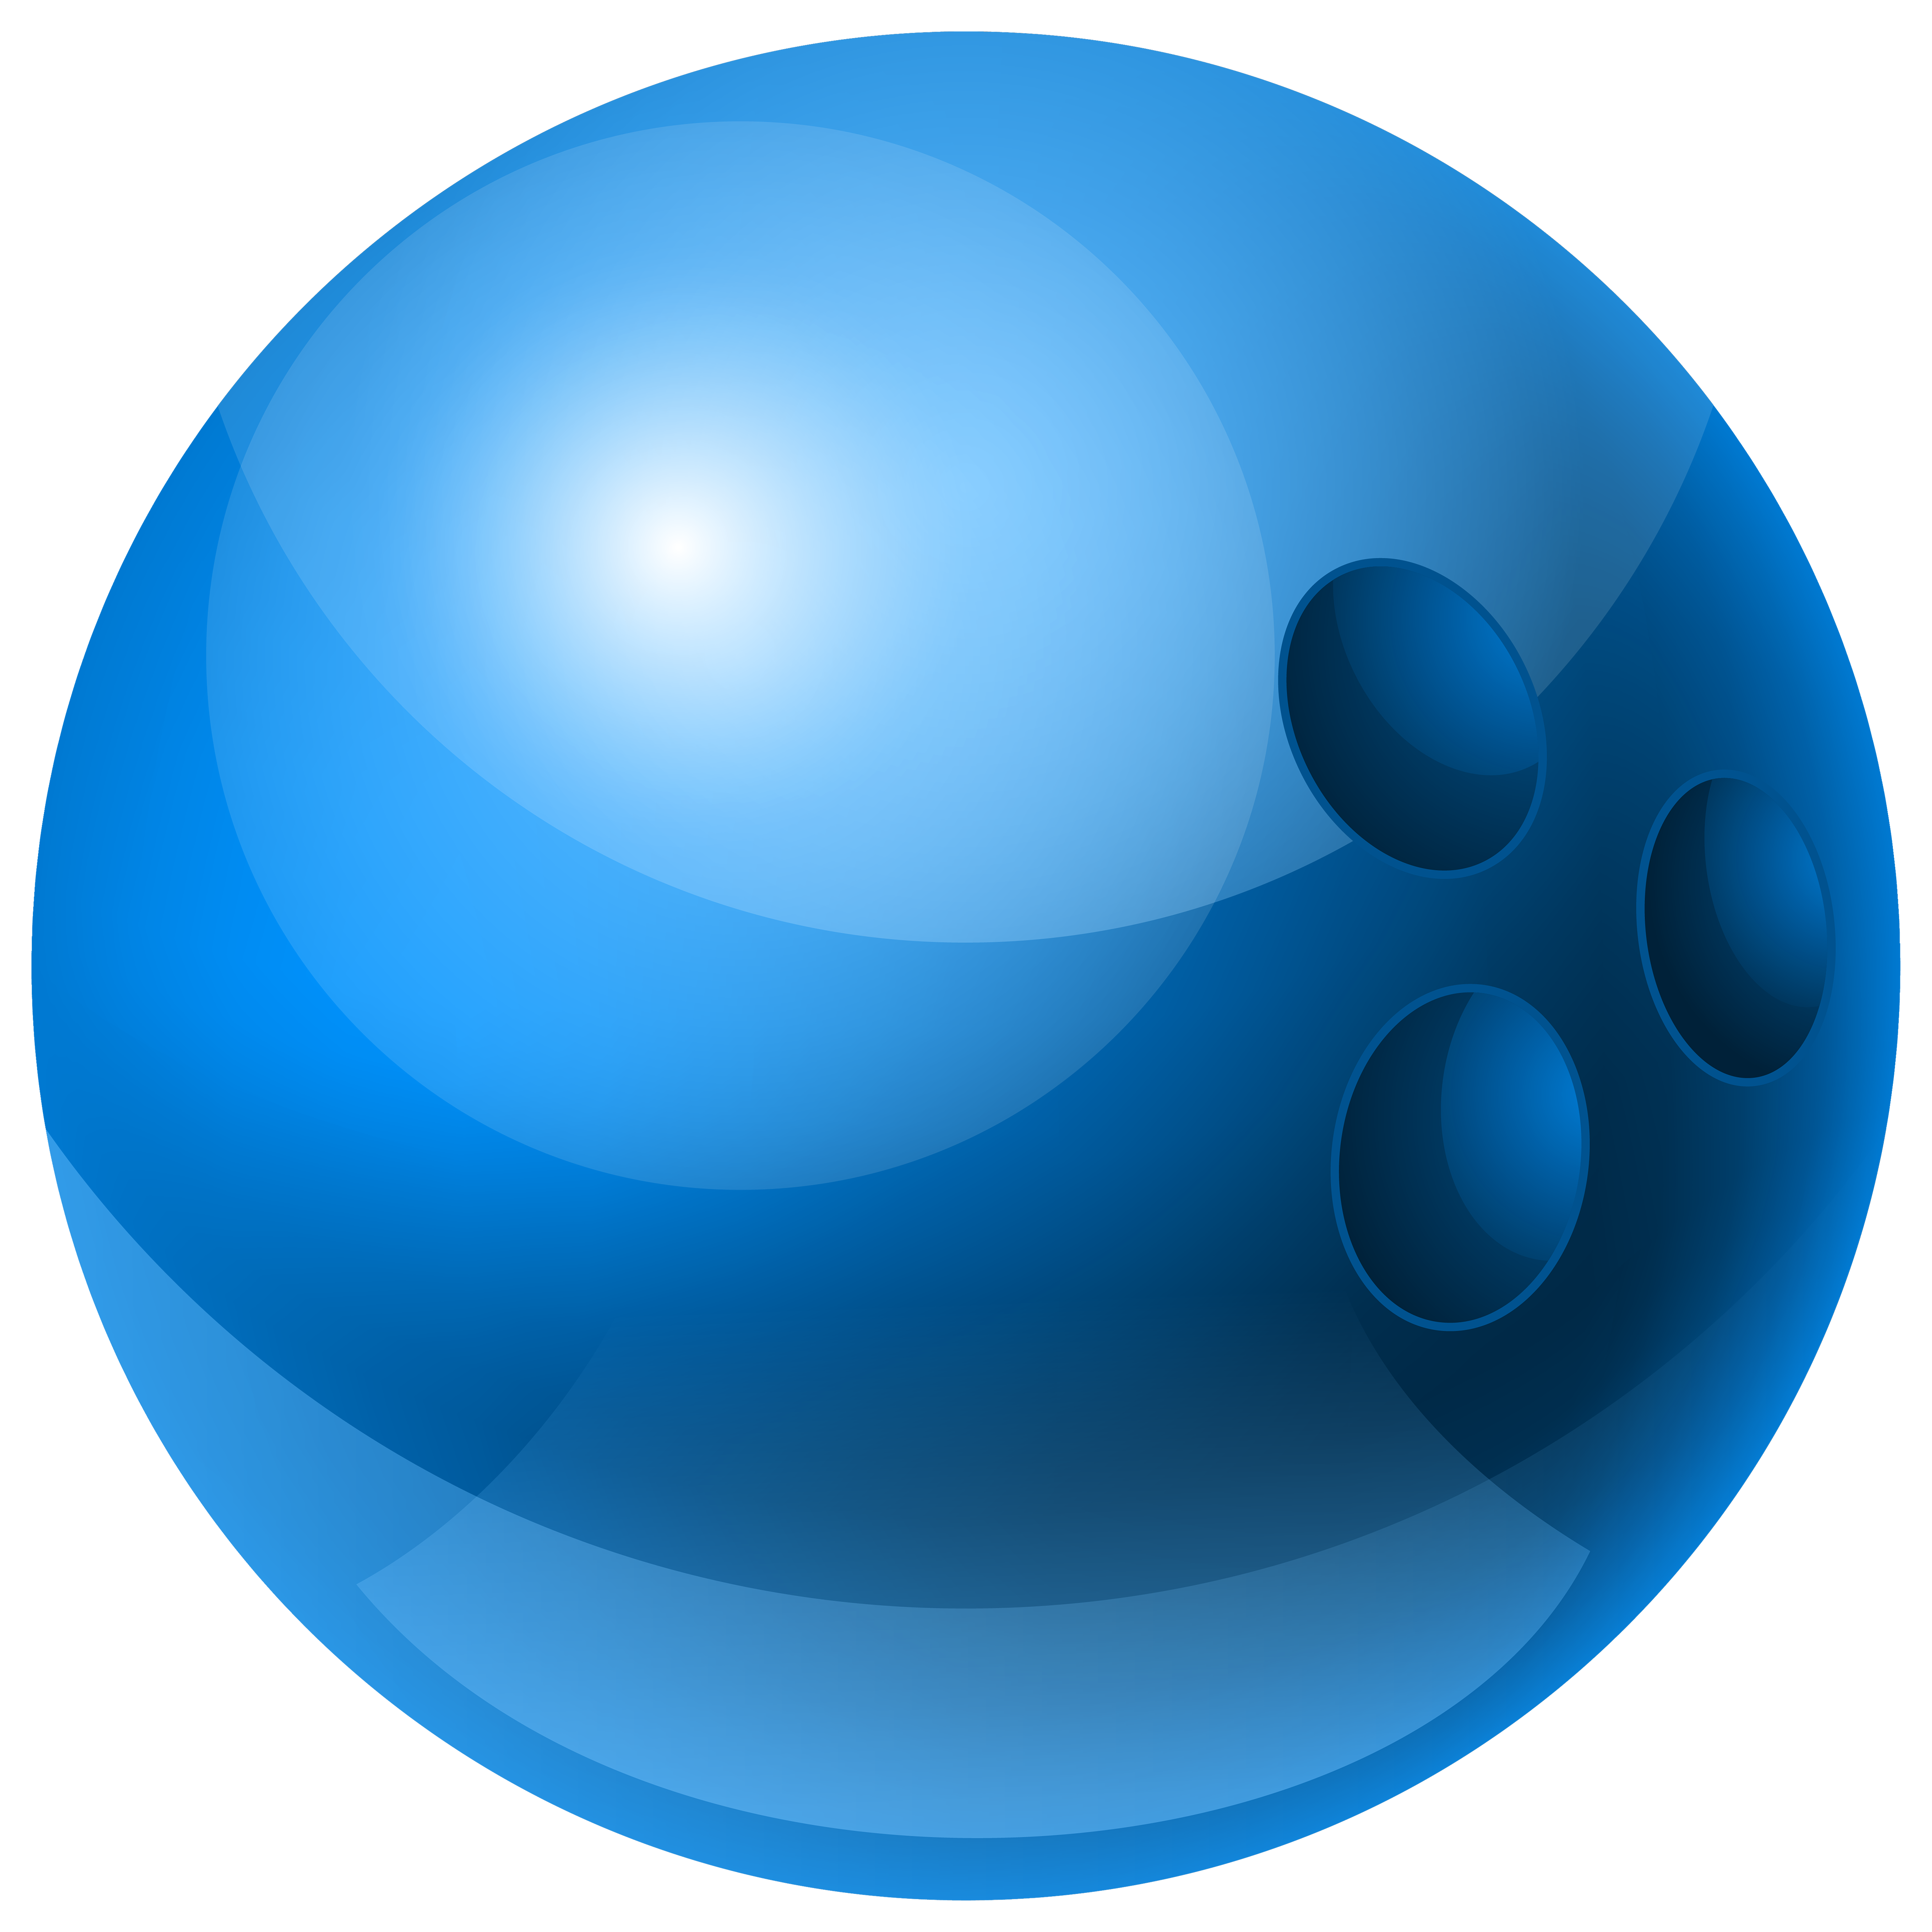 Blue Bowling Ball PNG Clipart.